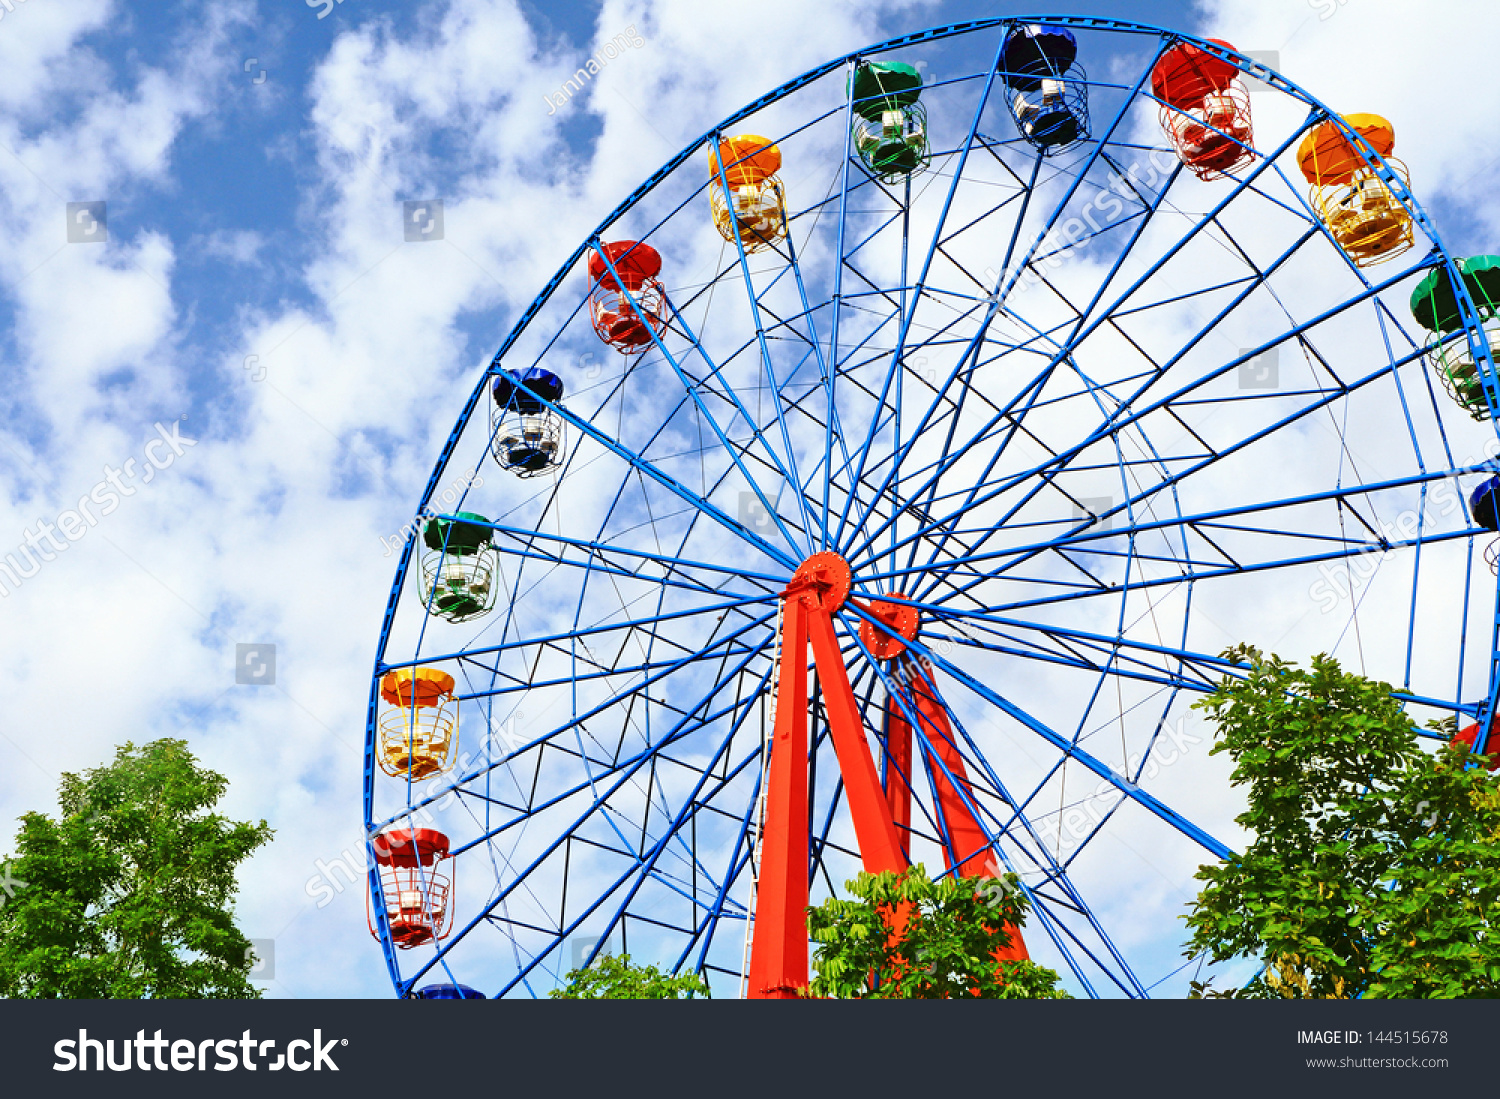 Giant ferris wheel against blue sky and white cloud which mean an amusement-park or fairground ride consisting of a giant vertical revolving wheel with passenger cars suspended on its outer edge #144515678